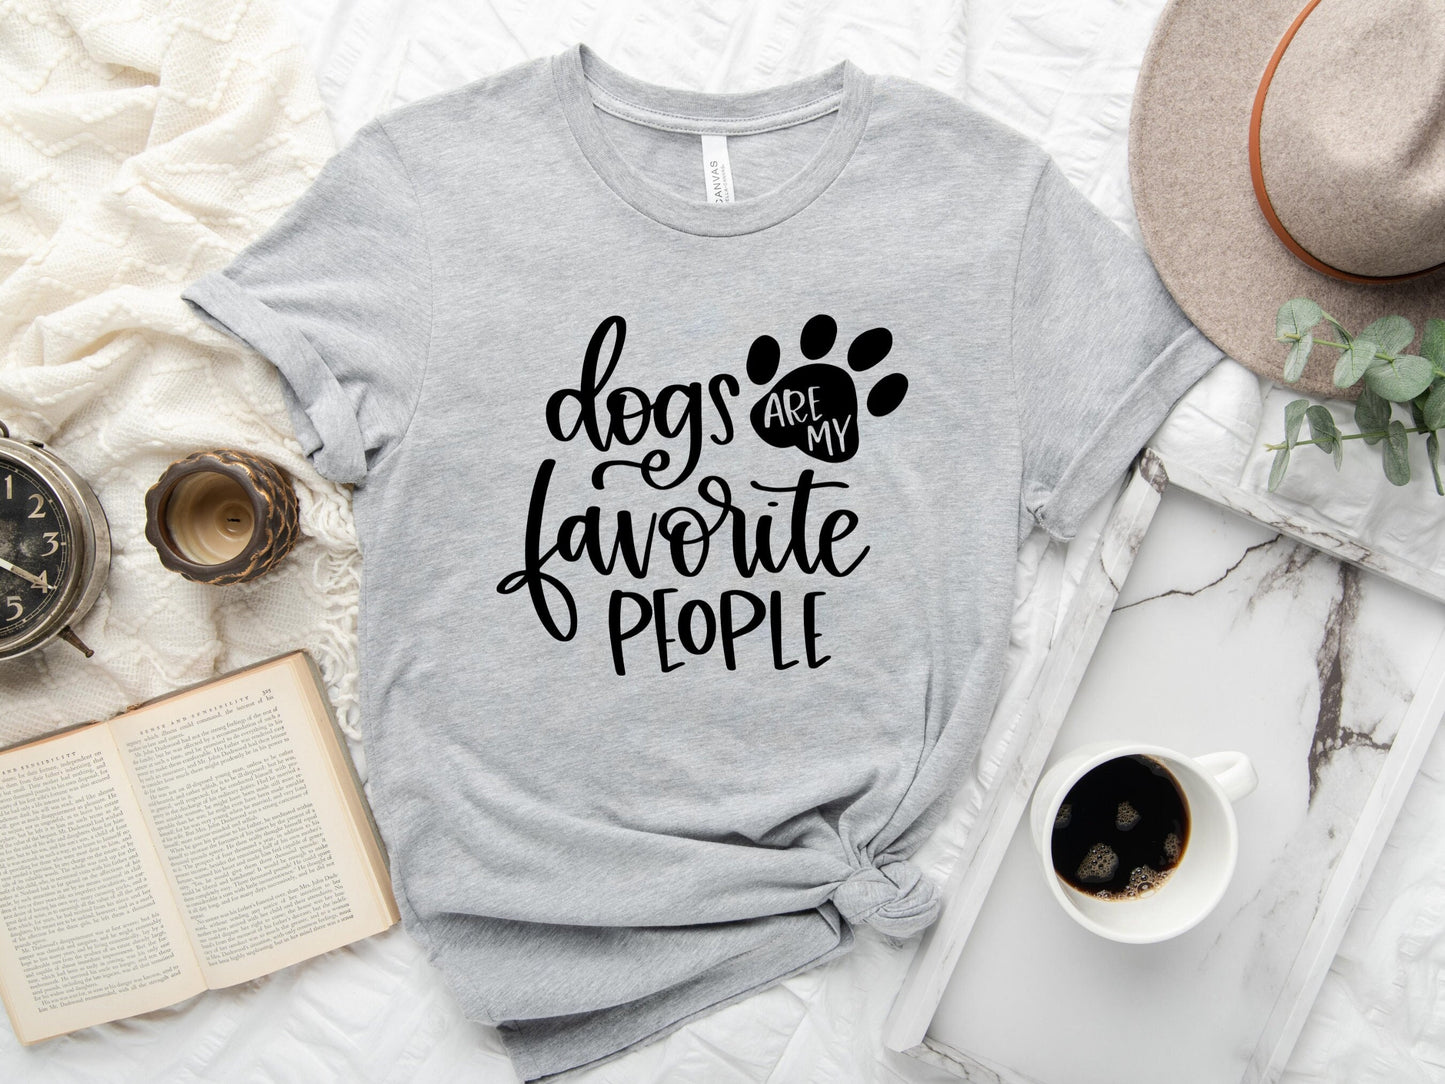 Dogs Are My Favorite People Shirt, Dog Lover Shirt, Dog Shirts, Dog Lover Gift, Dogs Are My Favorite, - Mardonyx T-Shirt Athletic Heather / S